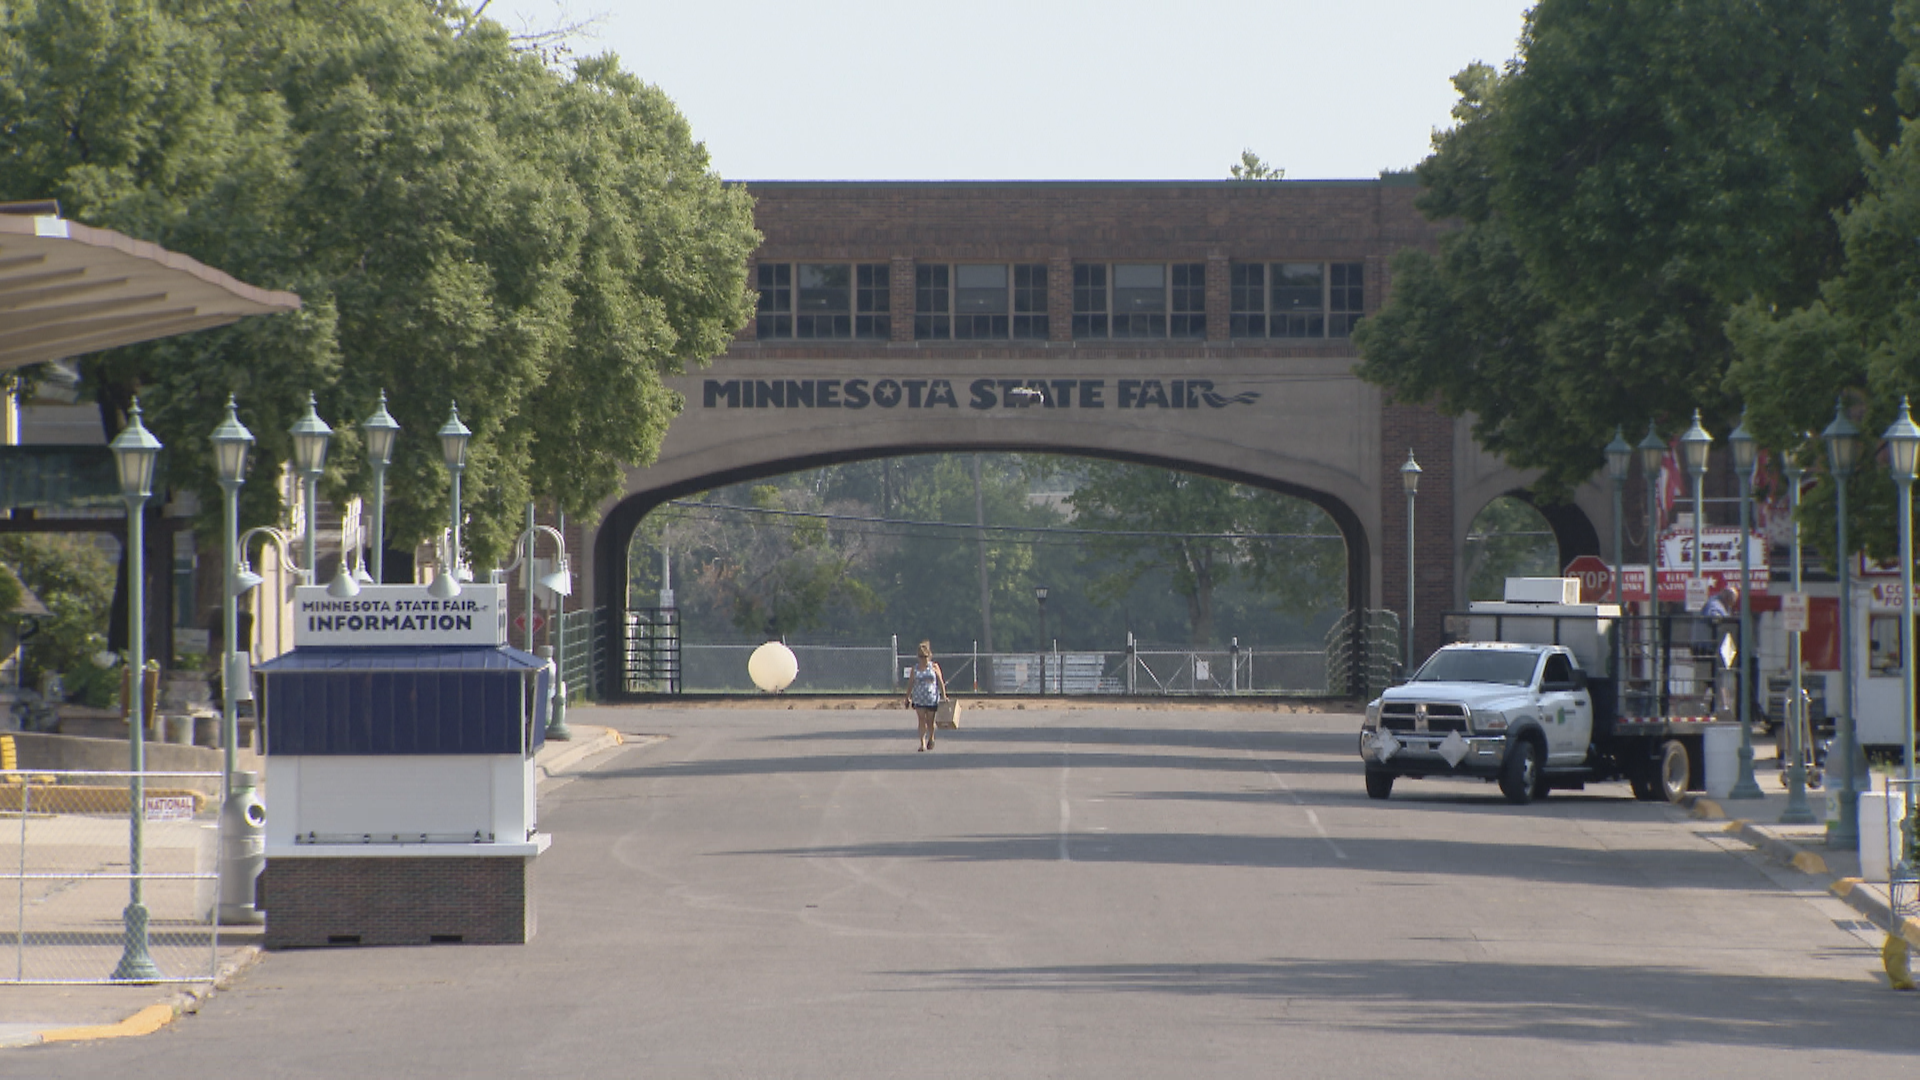 When it was announced in June that this year's Minnesota State Fair would be mask-free and without capacity limits, no one anticipated the most recent COVID surge.